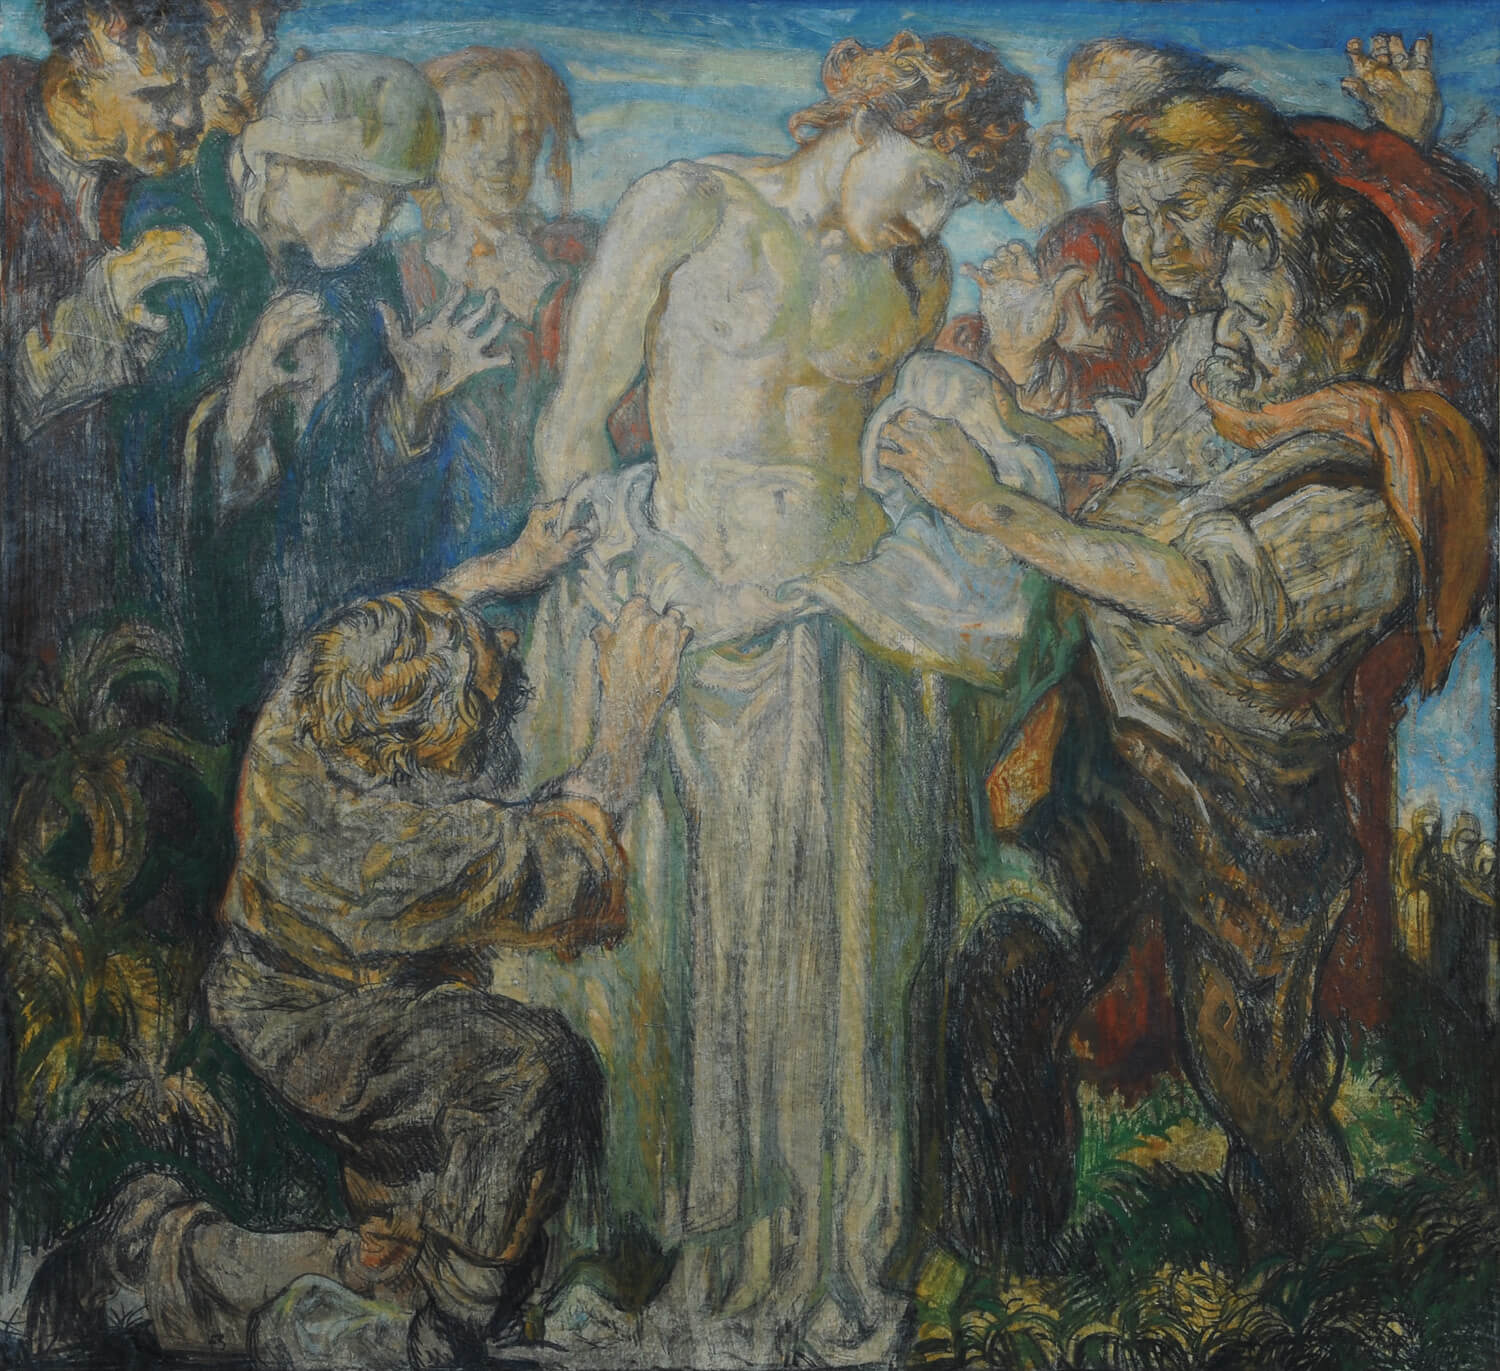 Frank Brangwyn - The 10th Station: Jesus is Stripped of His Garments